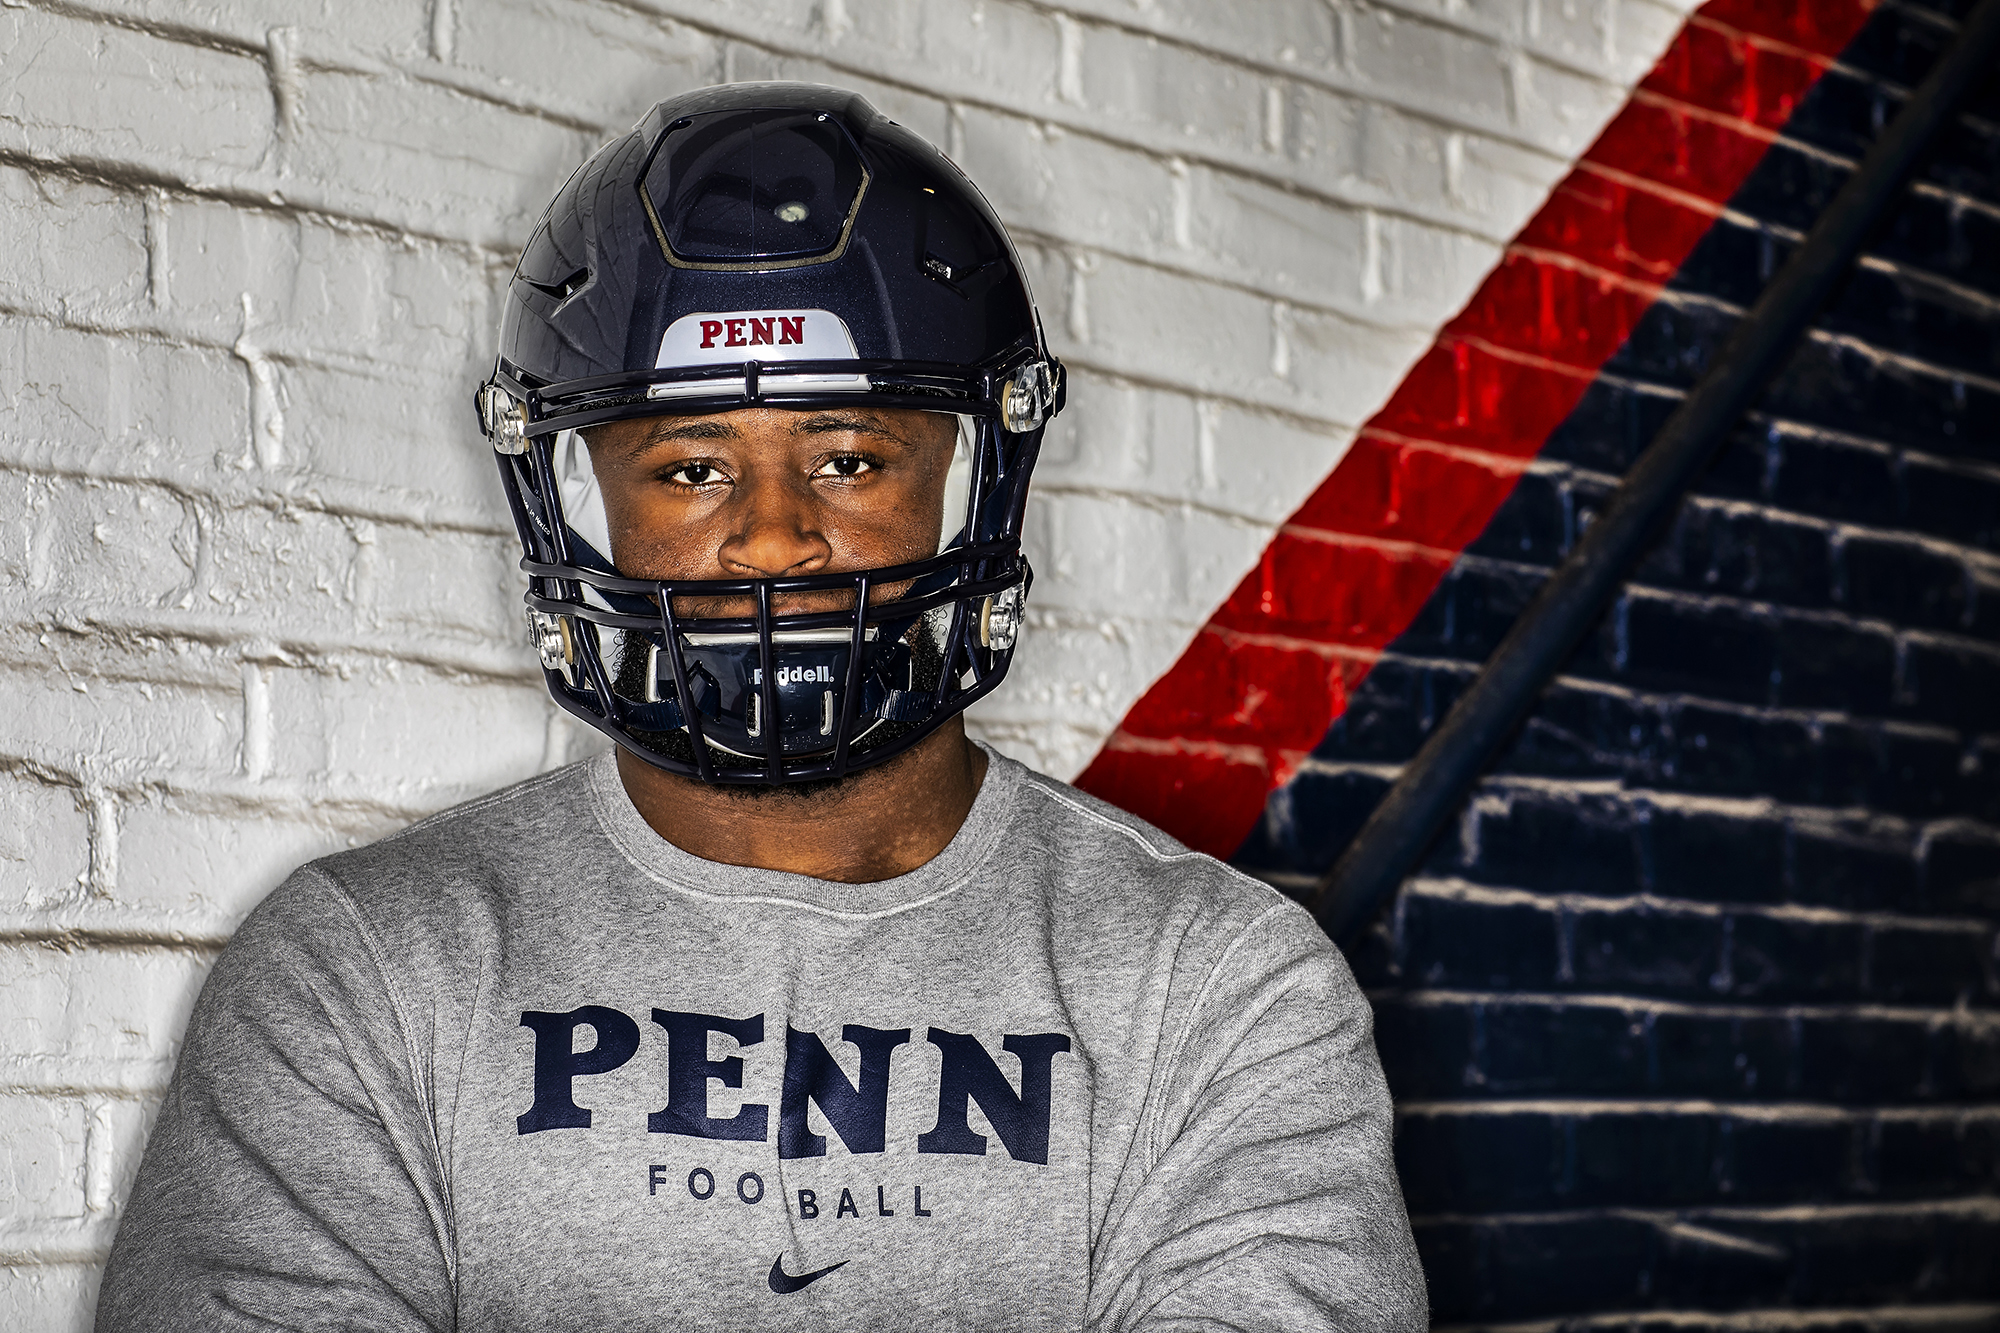 Prince Emili poses wearing his football helmet and a Penn sweatshirt near a red and blue wall at Franklin Field.